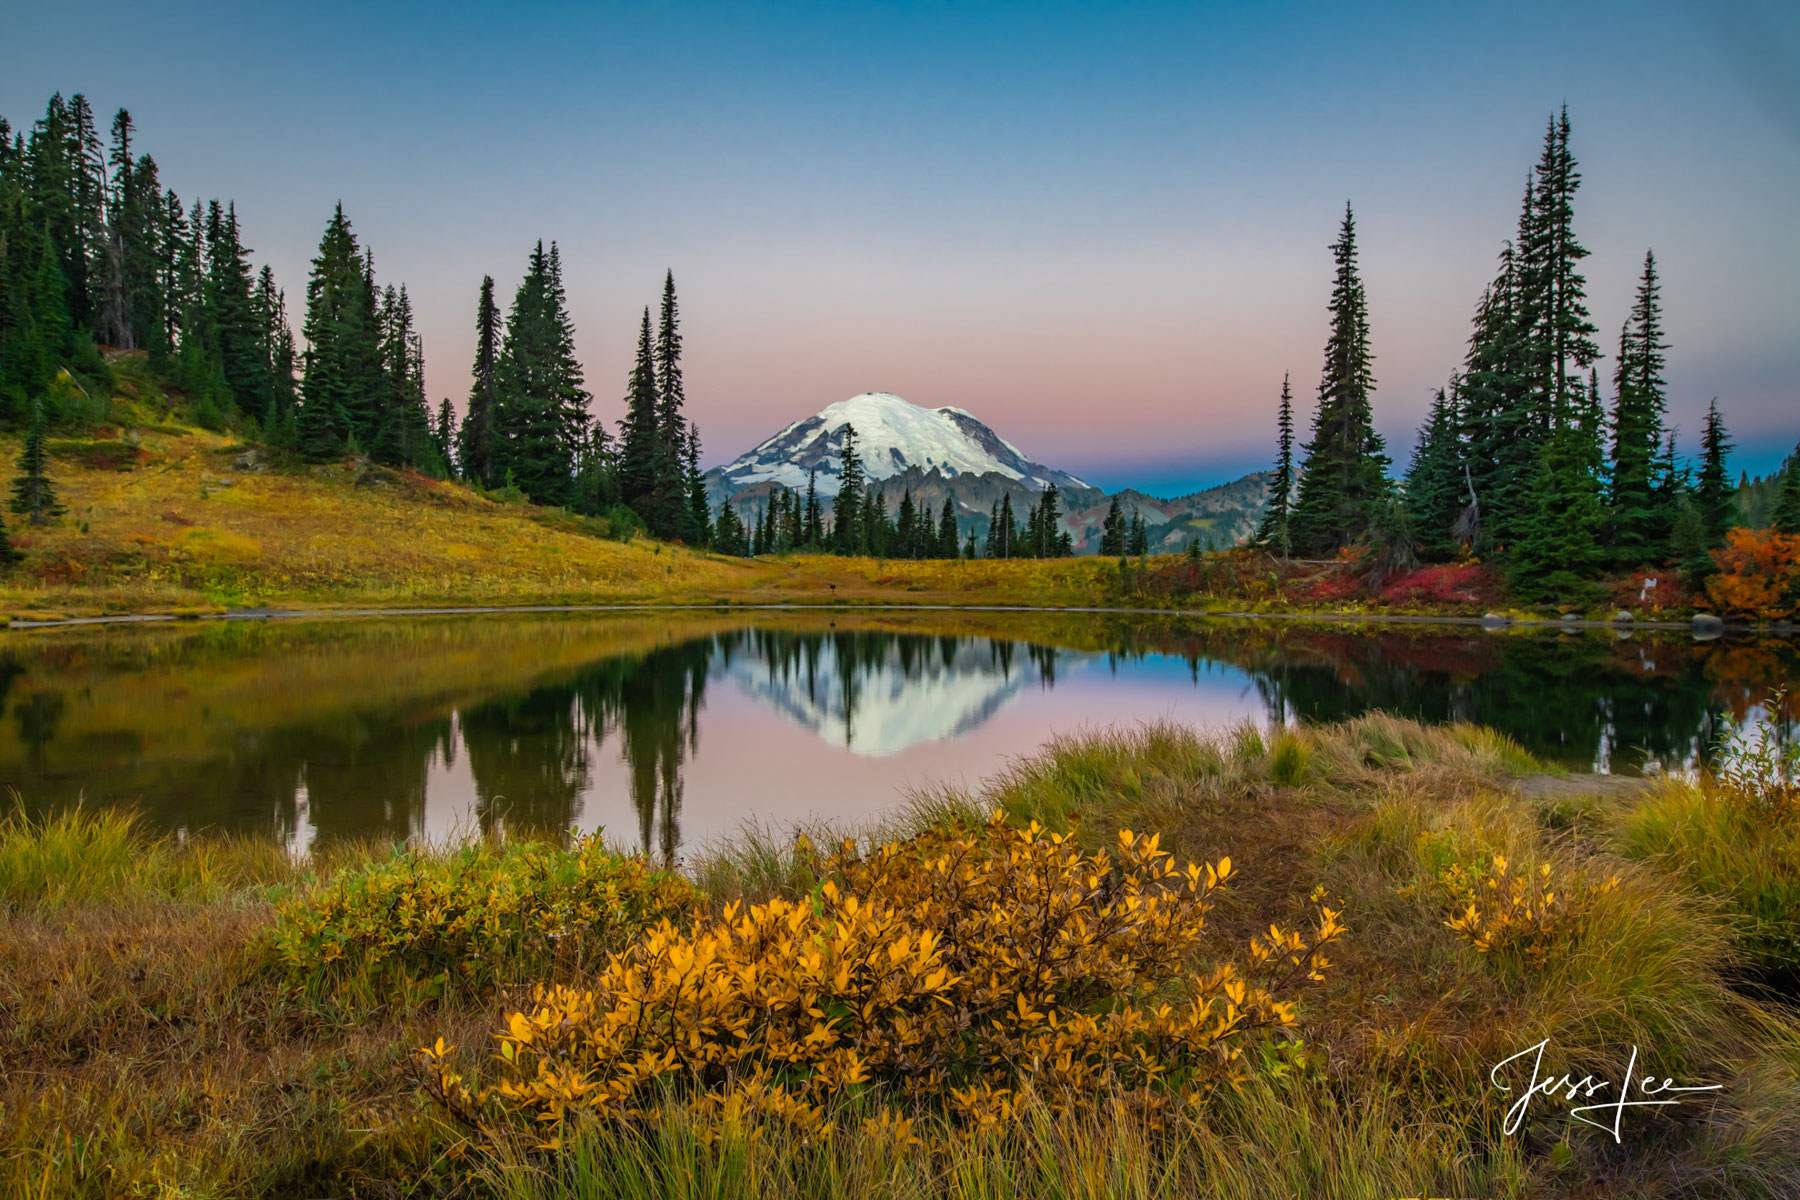 Limited Edition of 50 Exclusive high-resolution Museum Quality Fine Art Prints of the Morning Alpen Glow behind Mount Rainier...